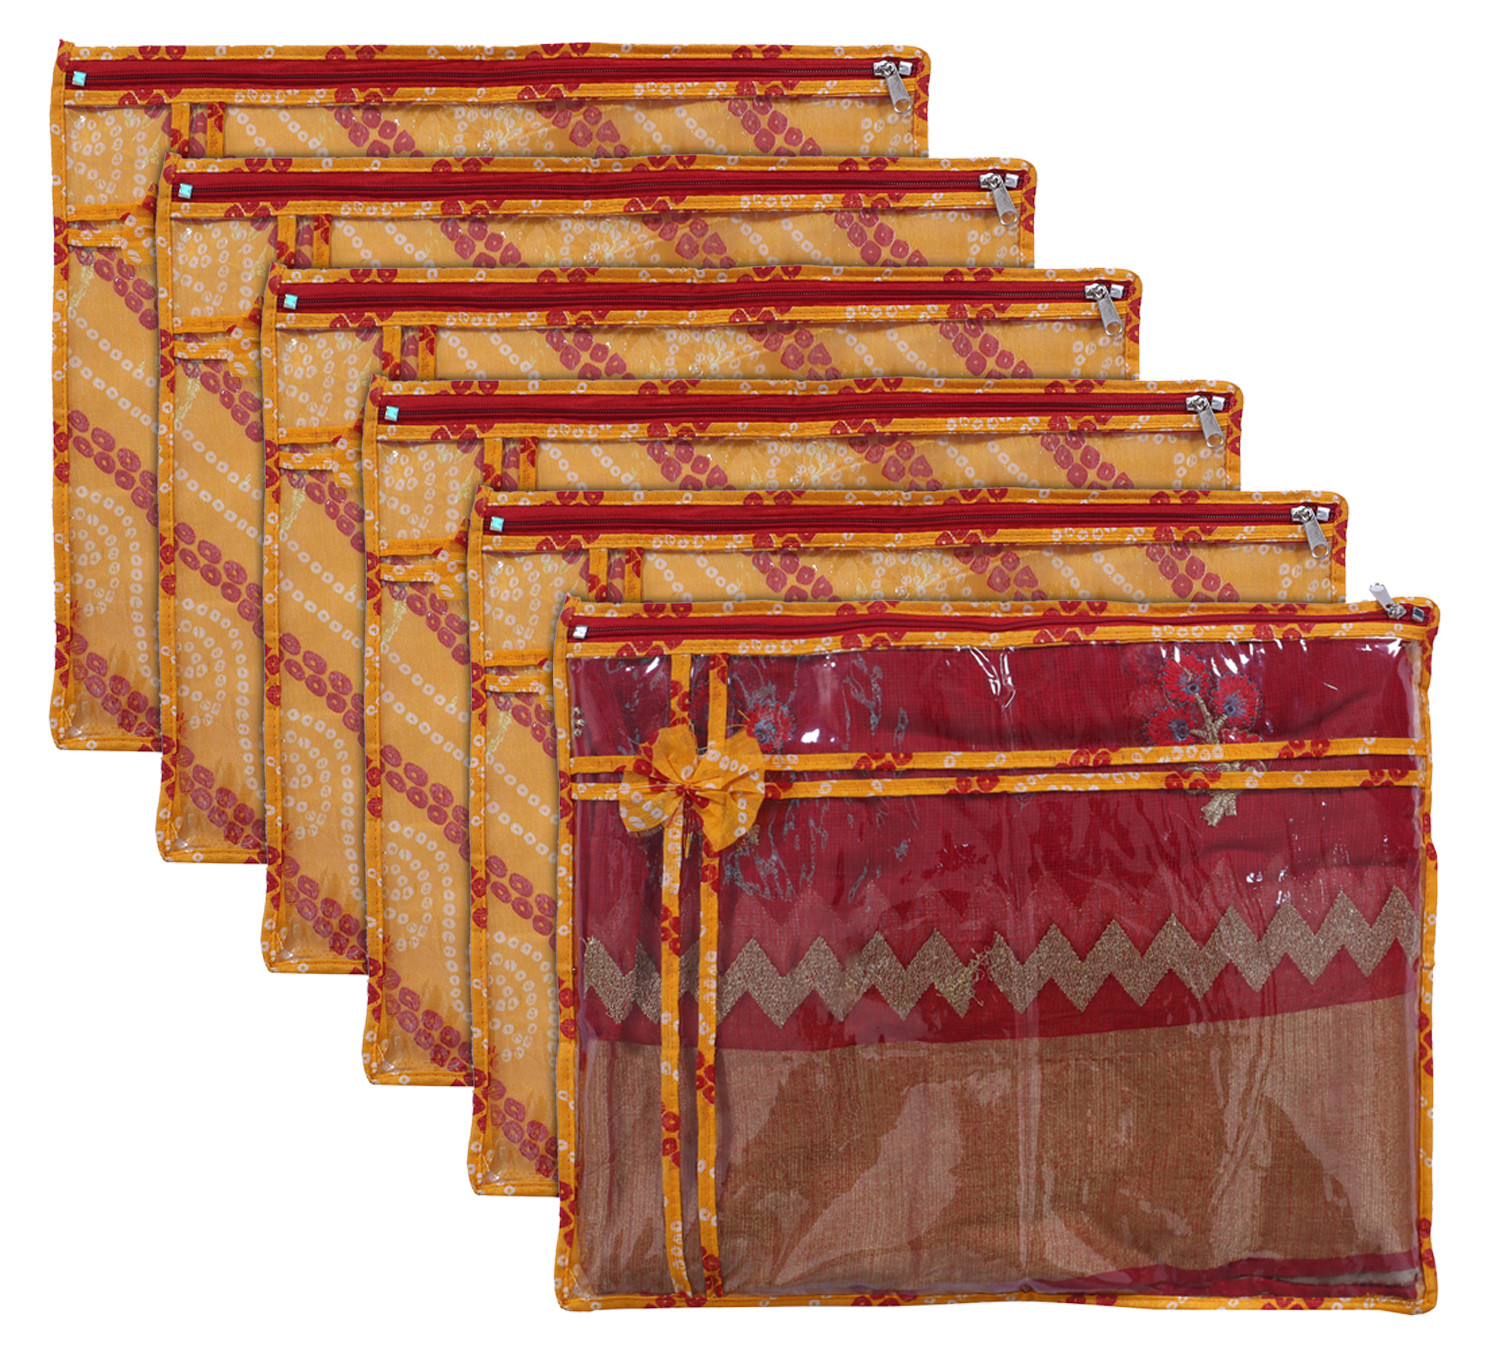 Kuber Industries Bandhani Print PVC Foldable Single Saree Cover|Clothes Storage For Saree, Lehenga, Suit With Transparent  (Yellow)